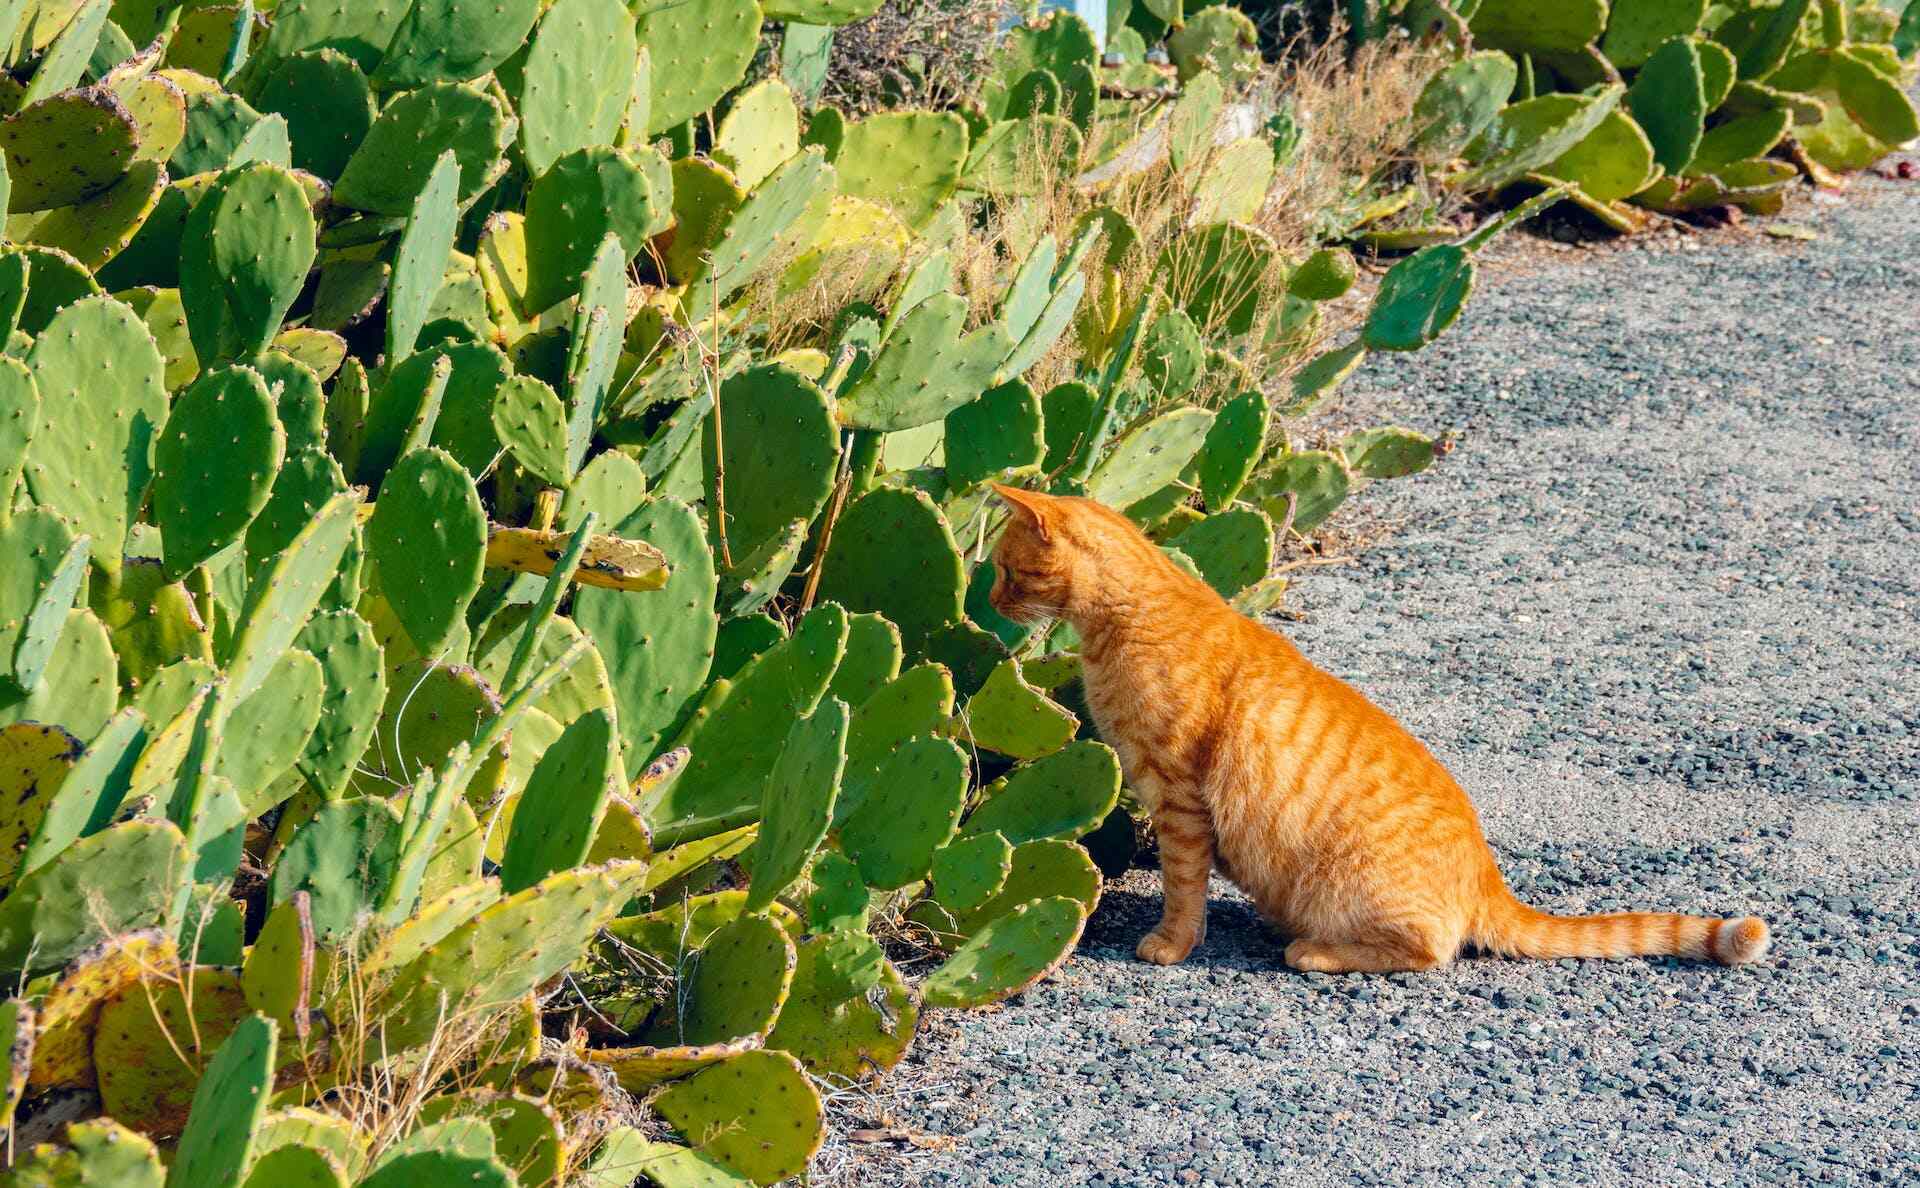 An outdoor cat sniffing at a cactus plant 